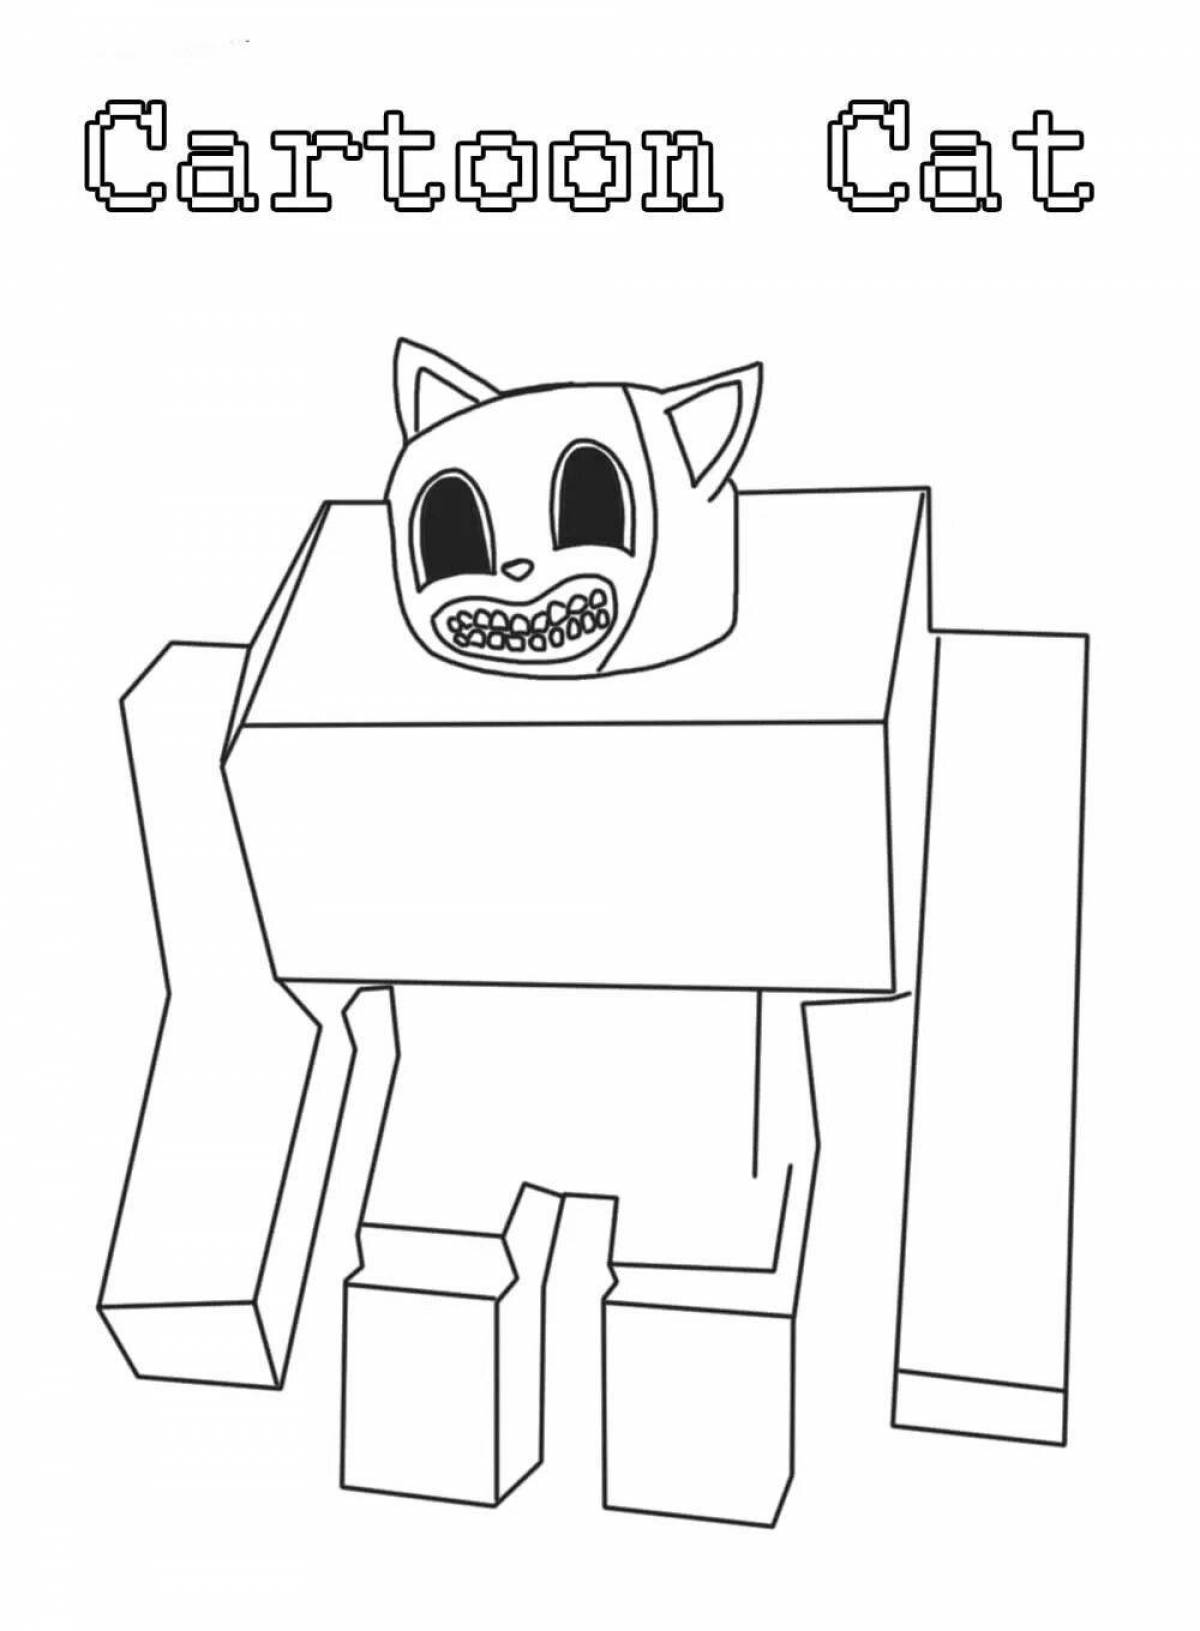 Exciting minecraft cats coloring page